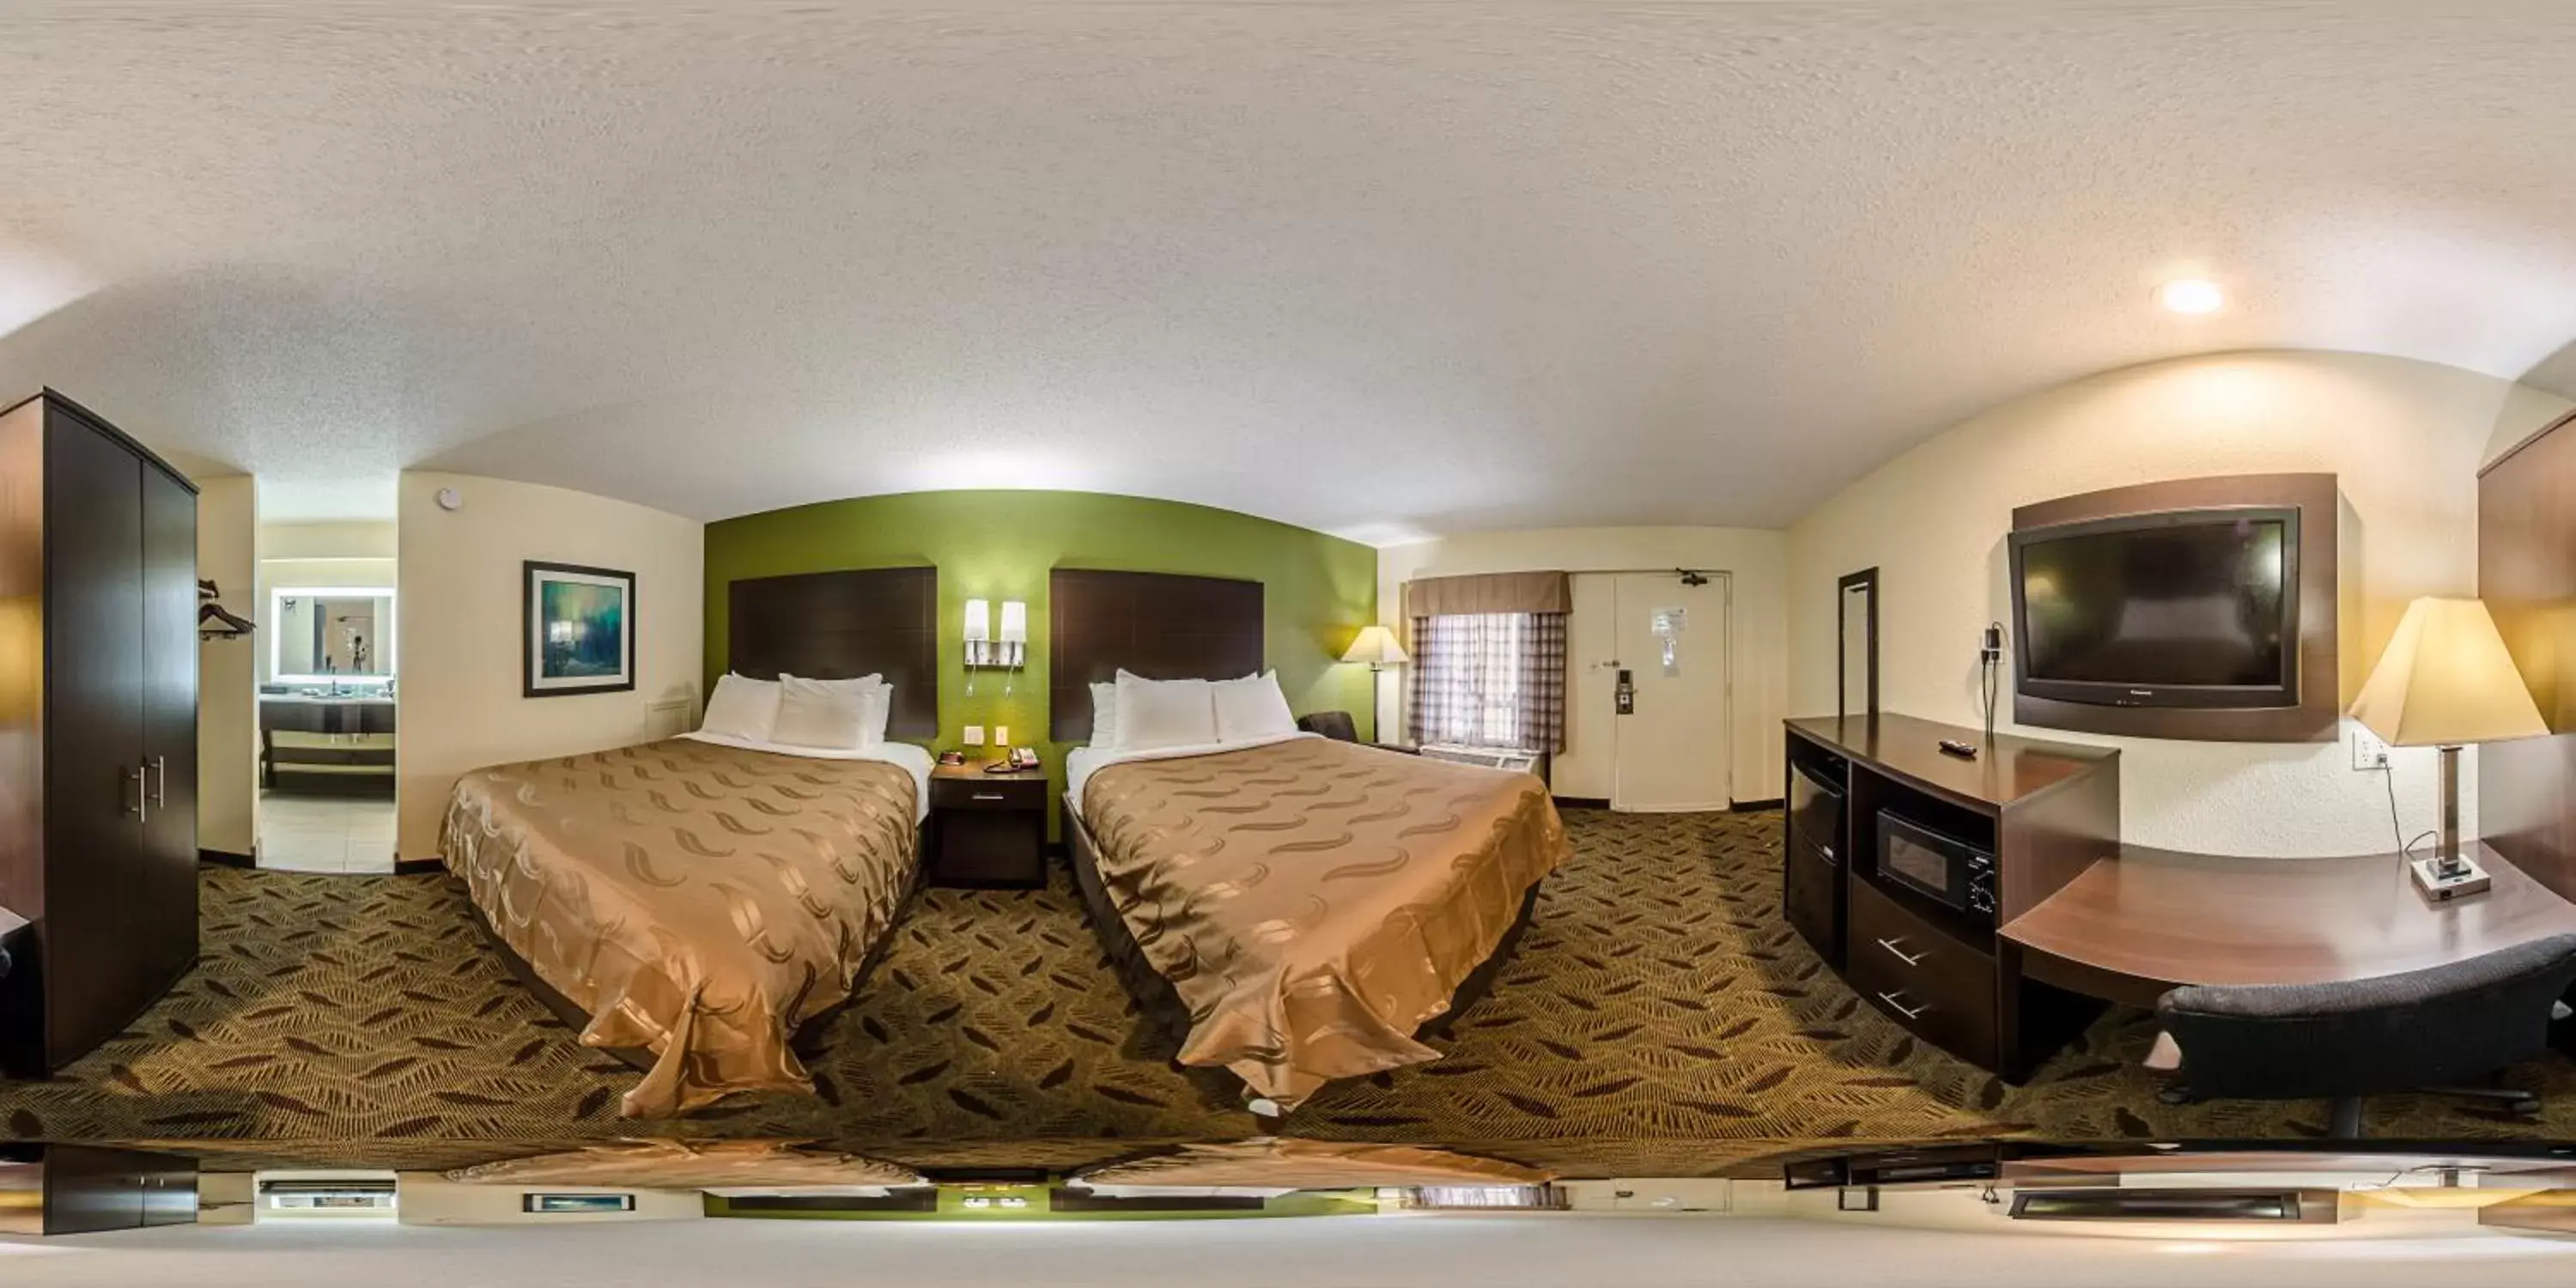 Standard Queen Room with Two Queen Beds - Non-Smoking in Quality Inn Tanglewood